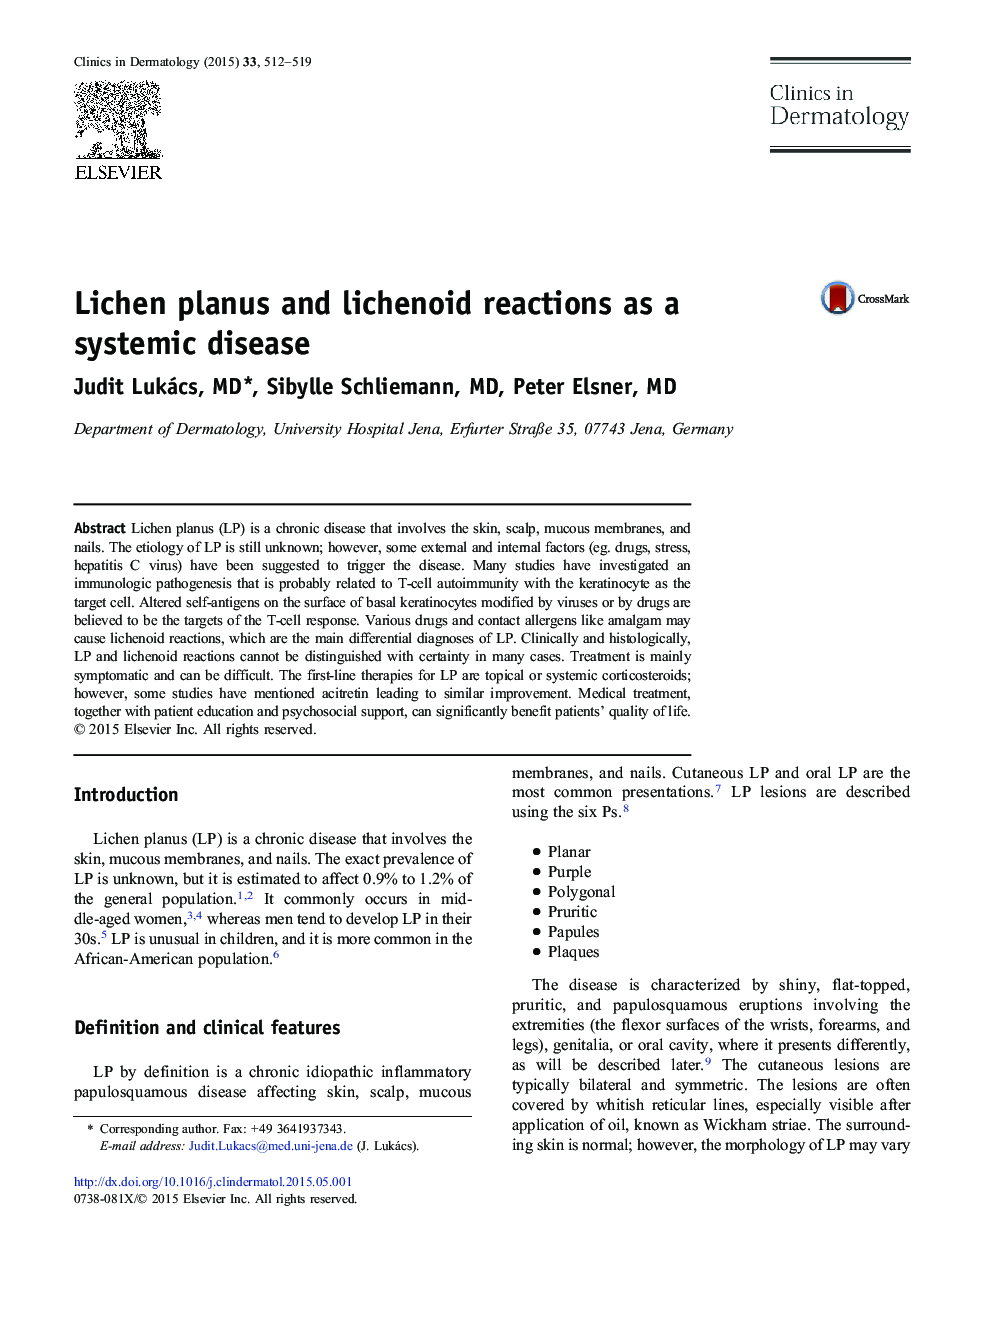 Lichen planus and lichenoid reactions as a systemic disease